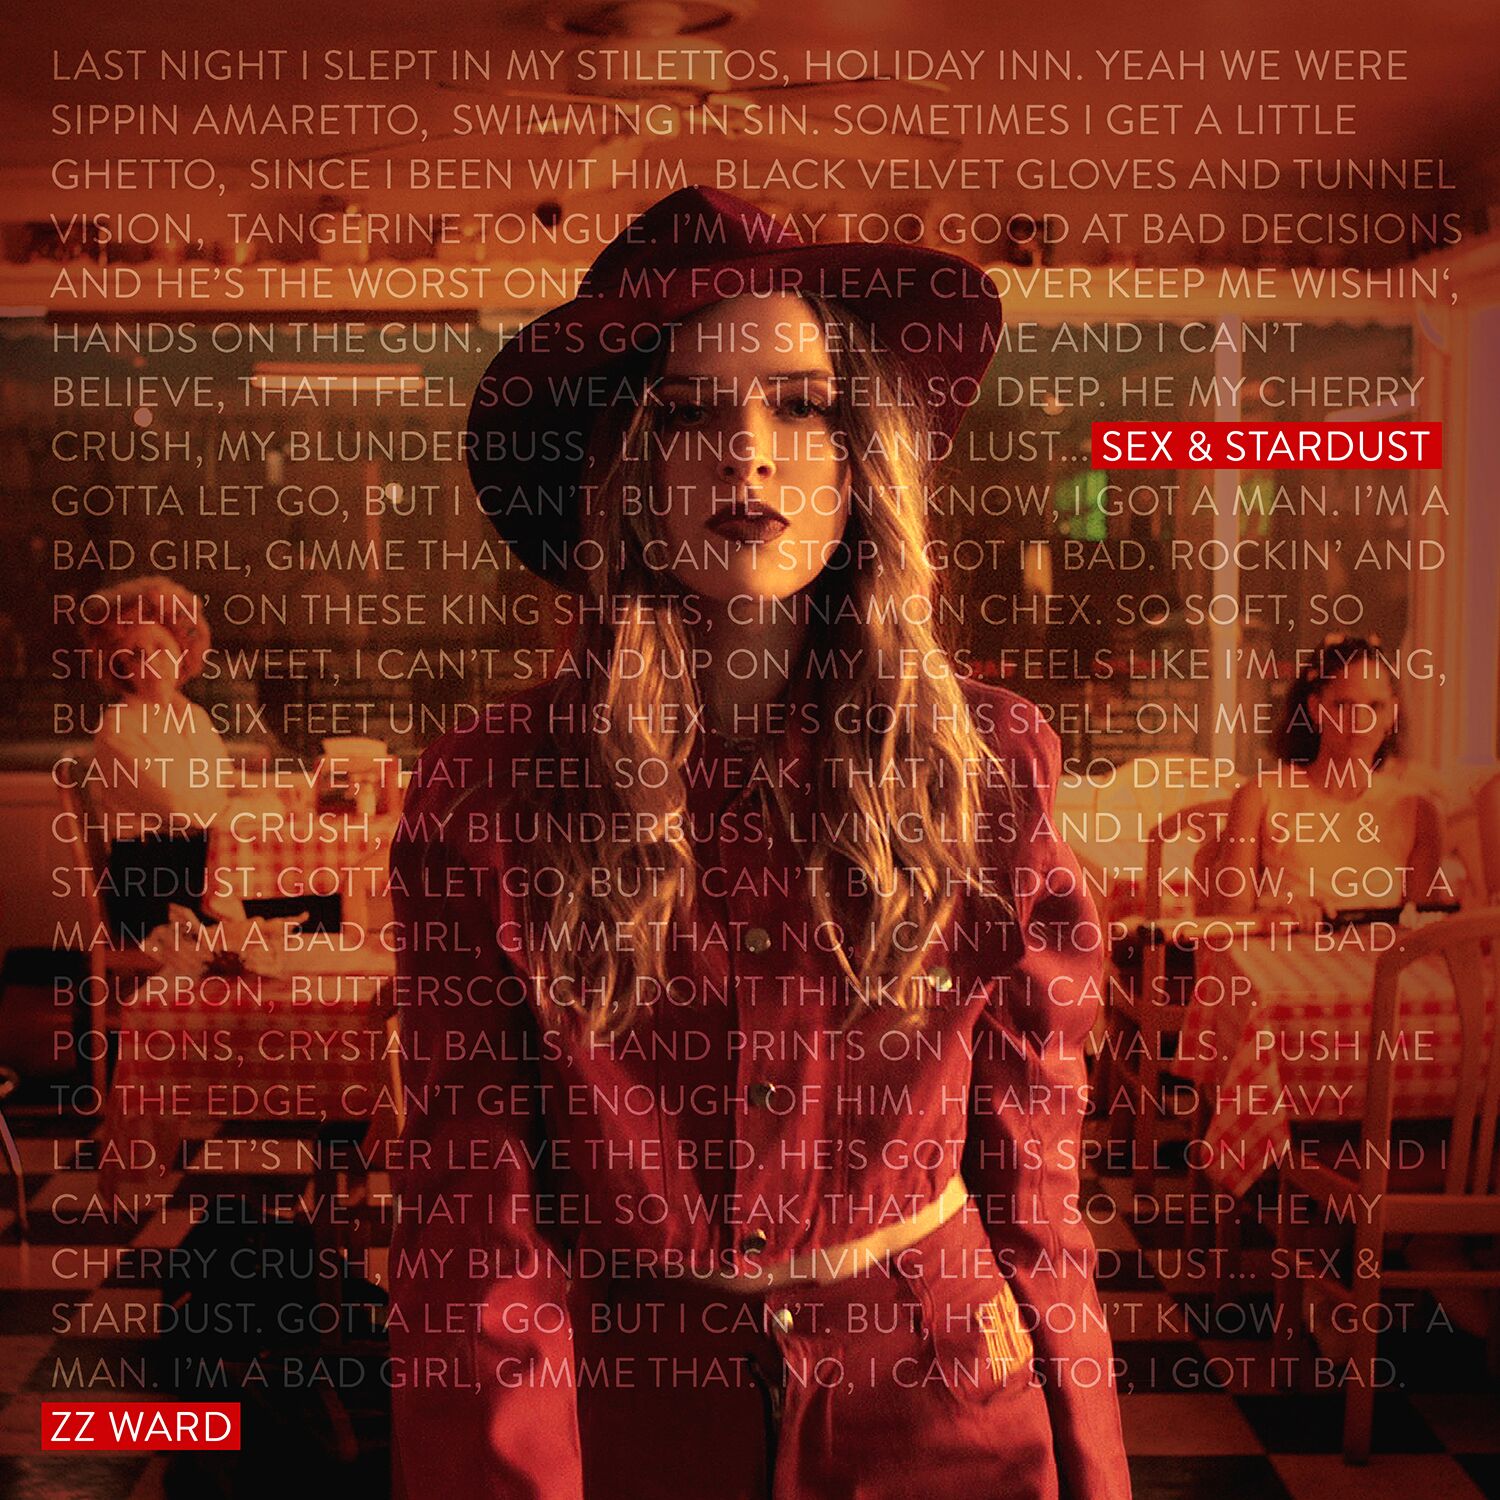 Sex and Stardust cover art - ZZ Ward